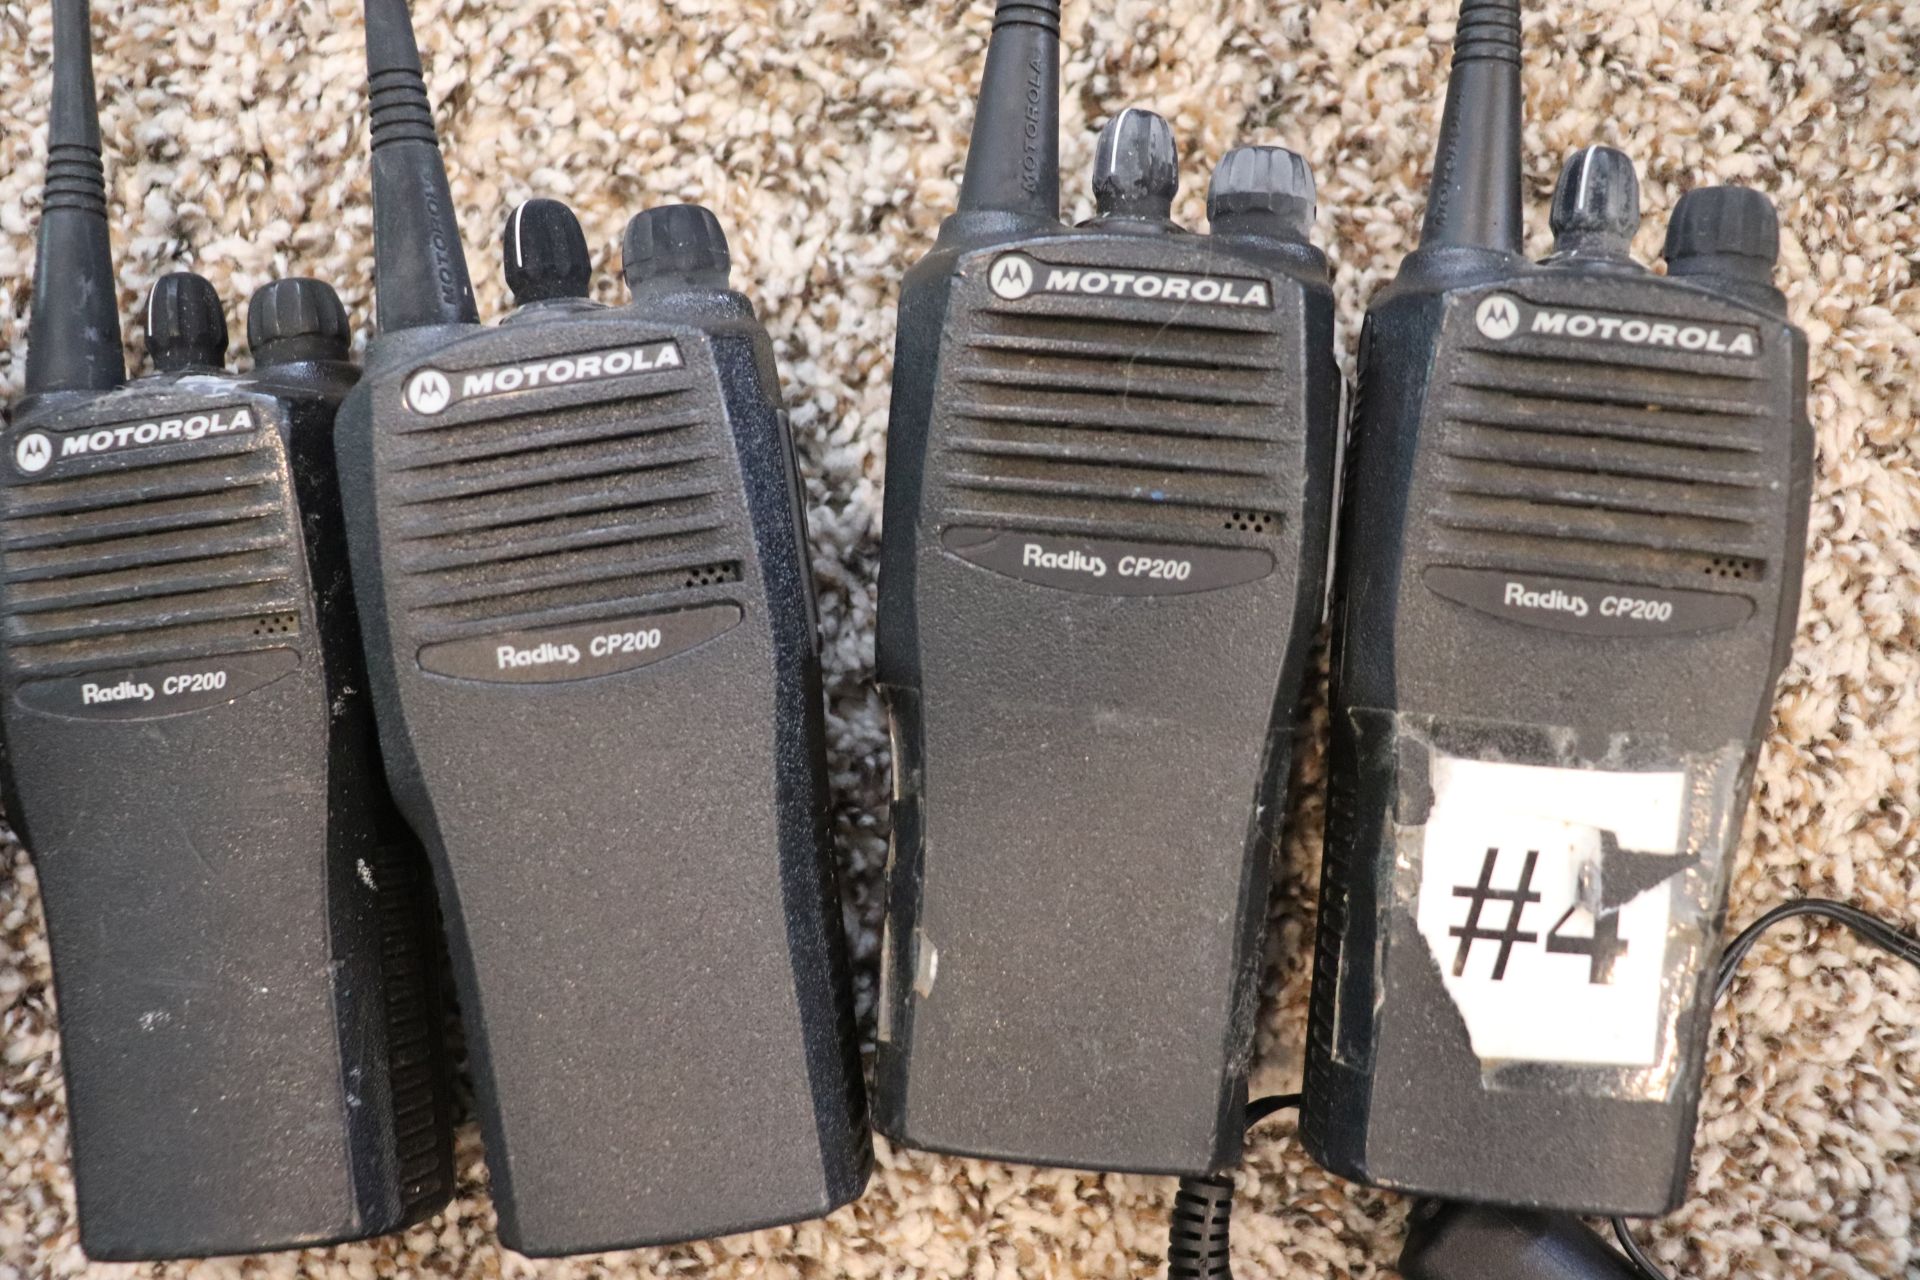 Box lot of six Motorola Two-Way Radios, model Radius CP200, comes with three charging stands - Image 2 of 5